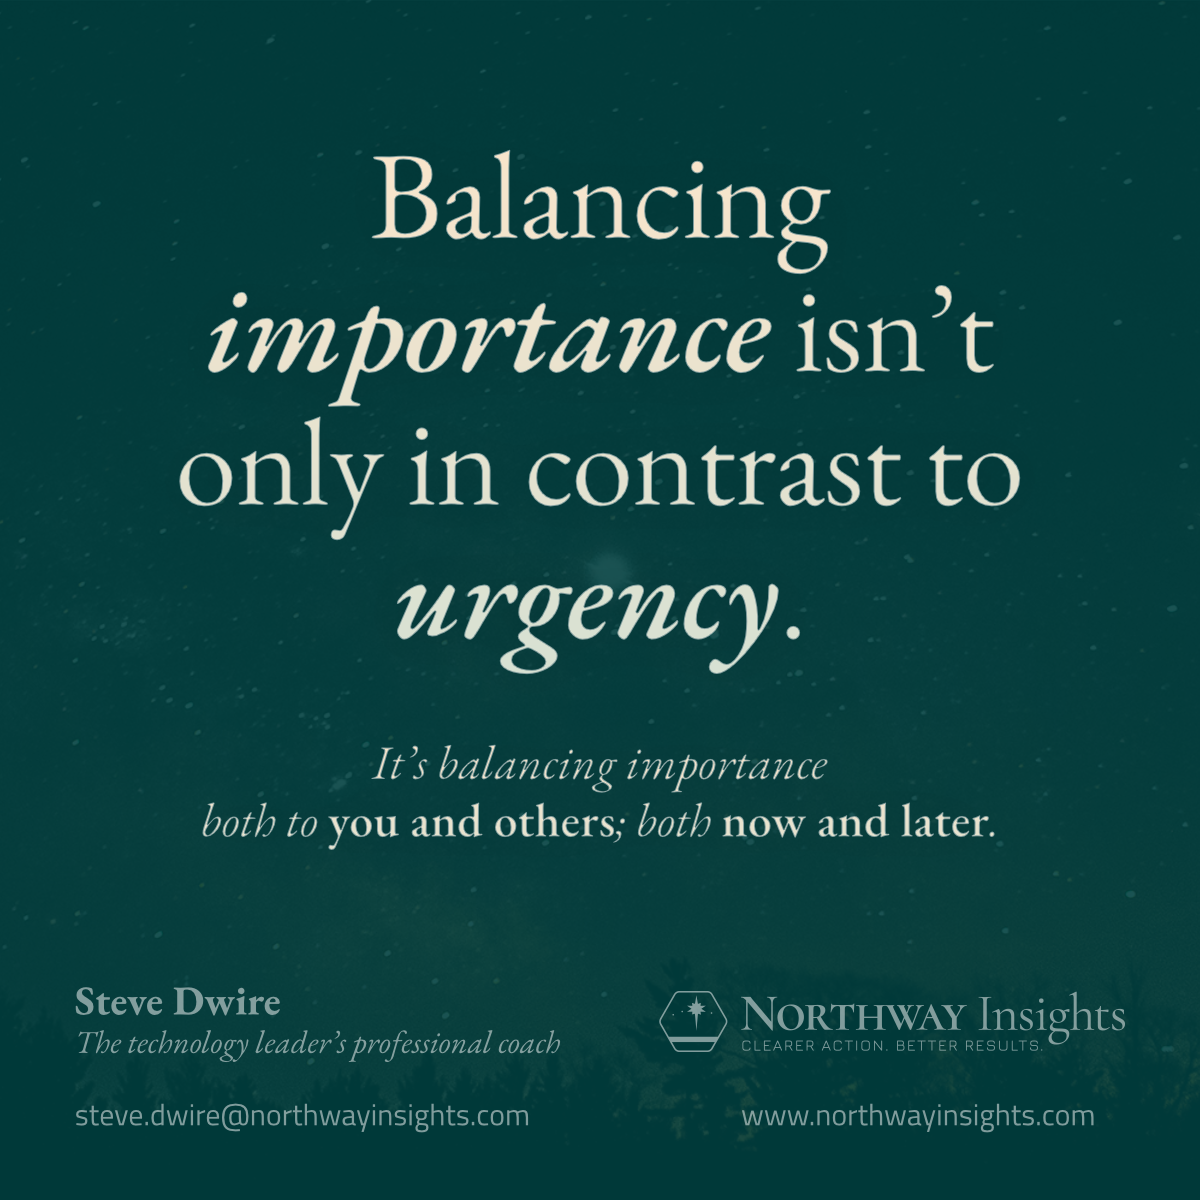 Balancing importance isn’t only in contrast to urgency